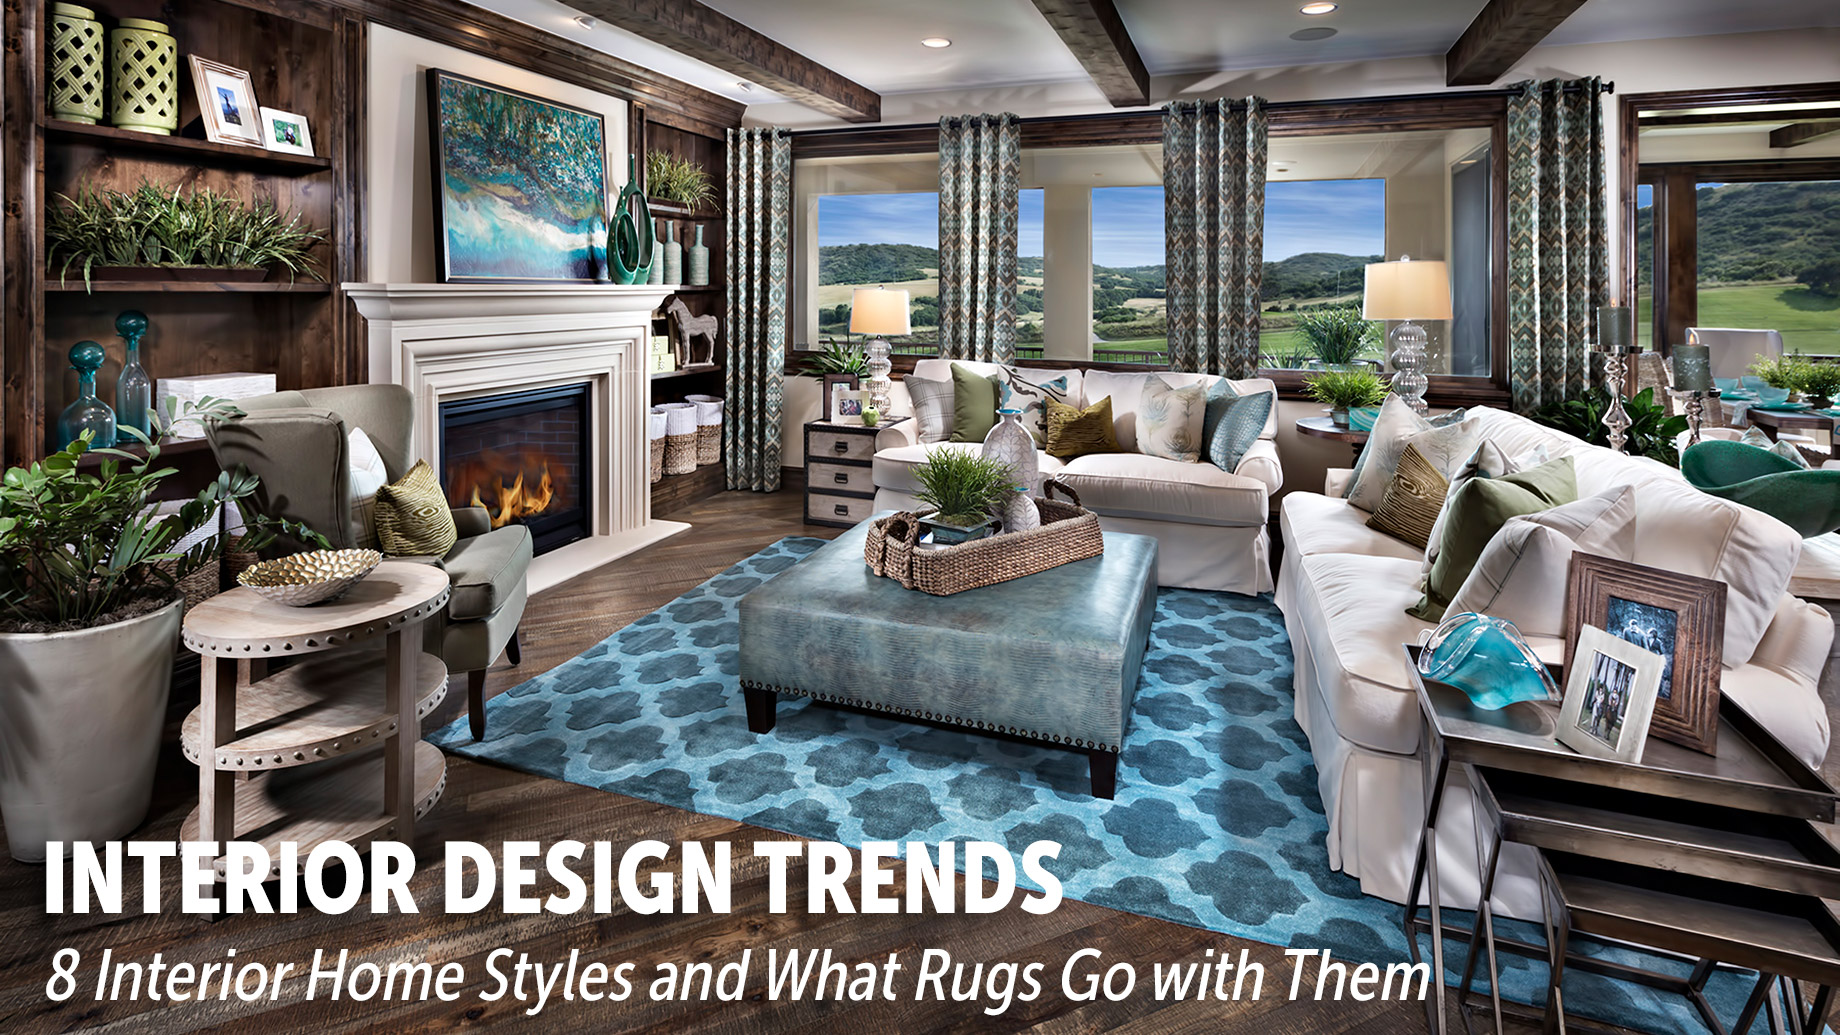 Interior Design Trends - 8 Interior Home Styles and What Rugs Go with Them